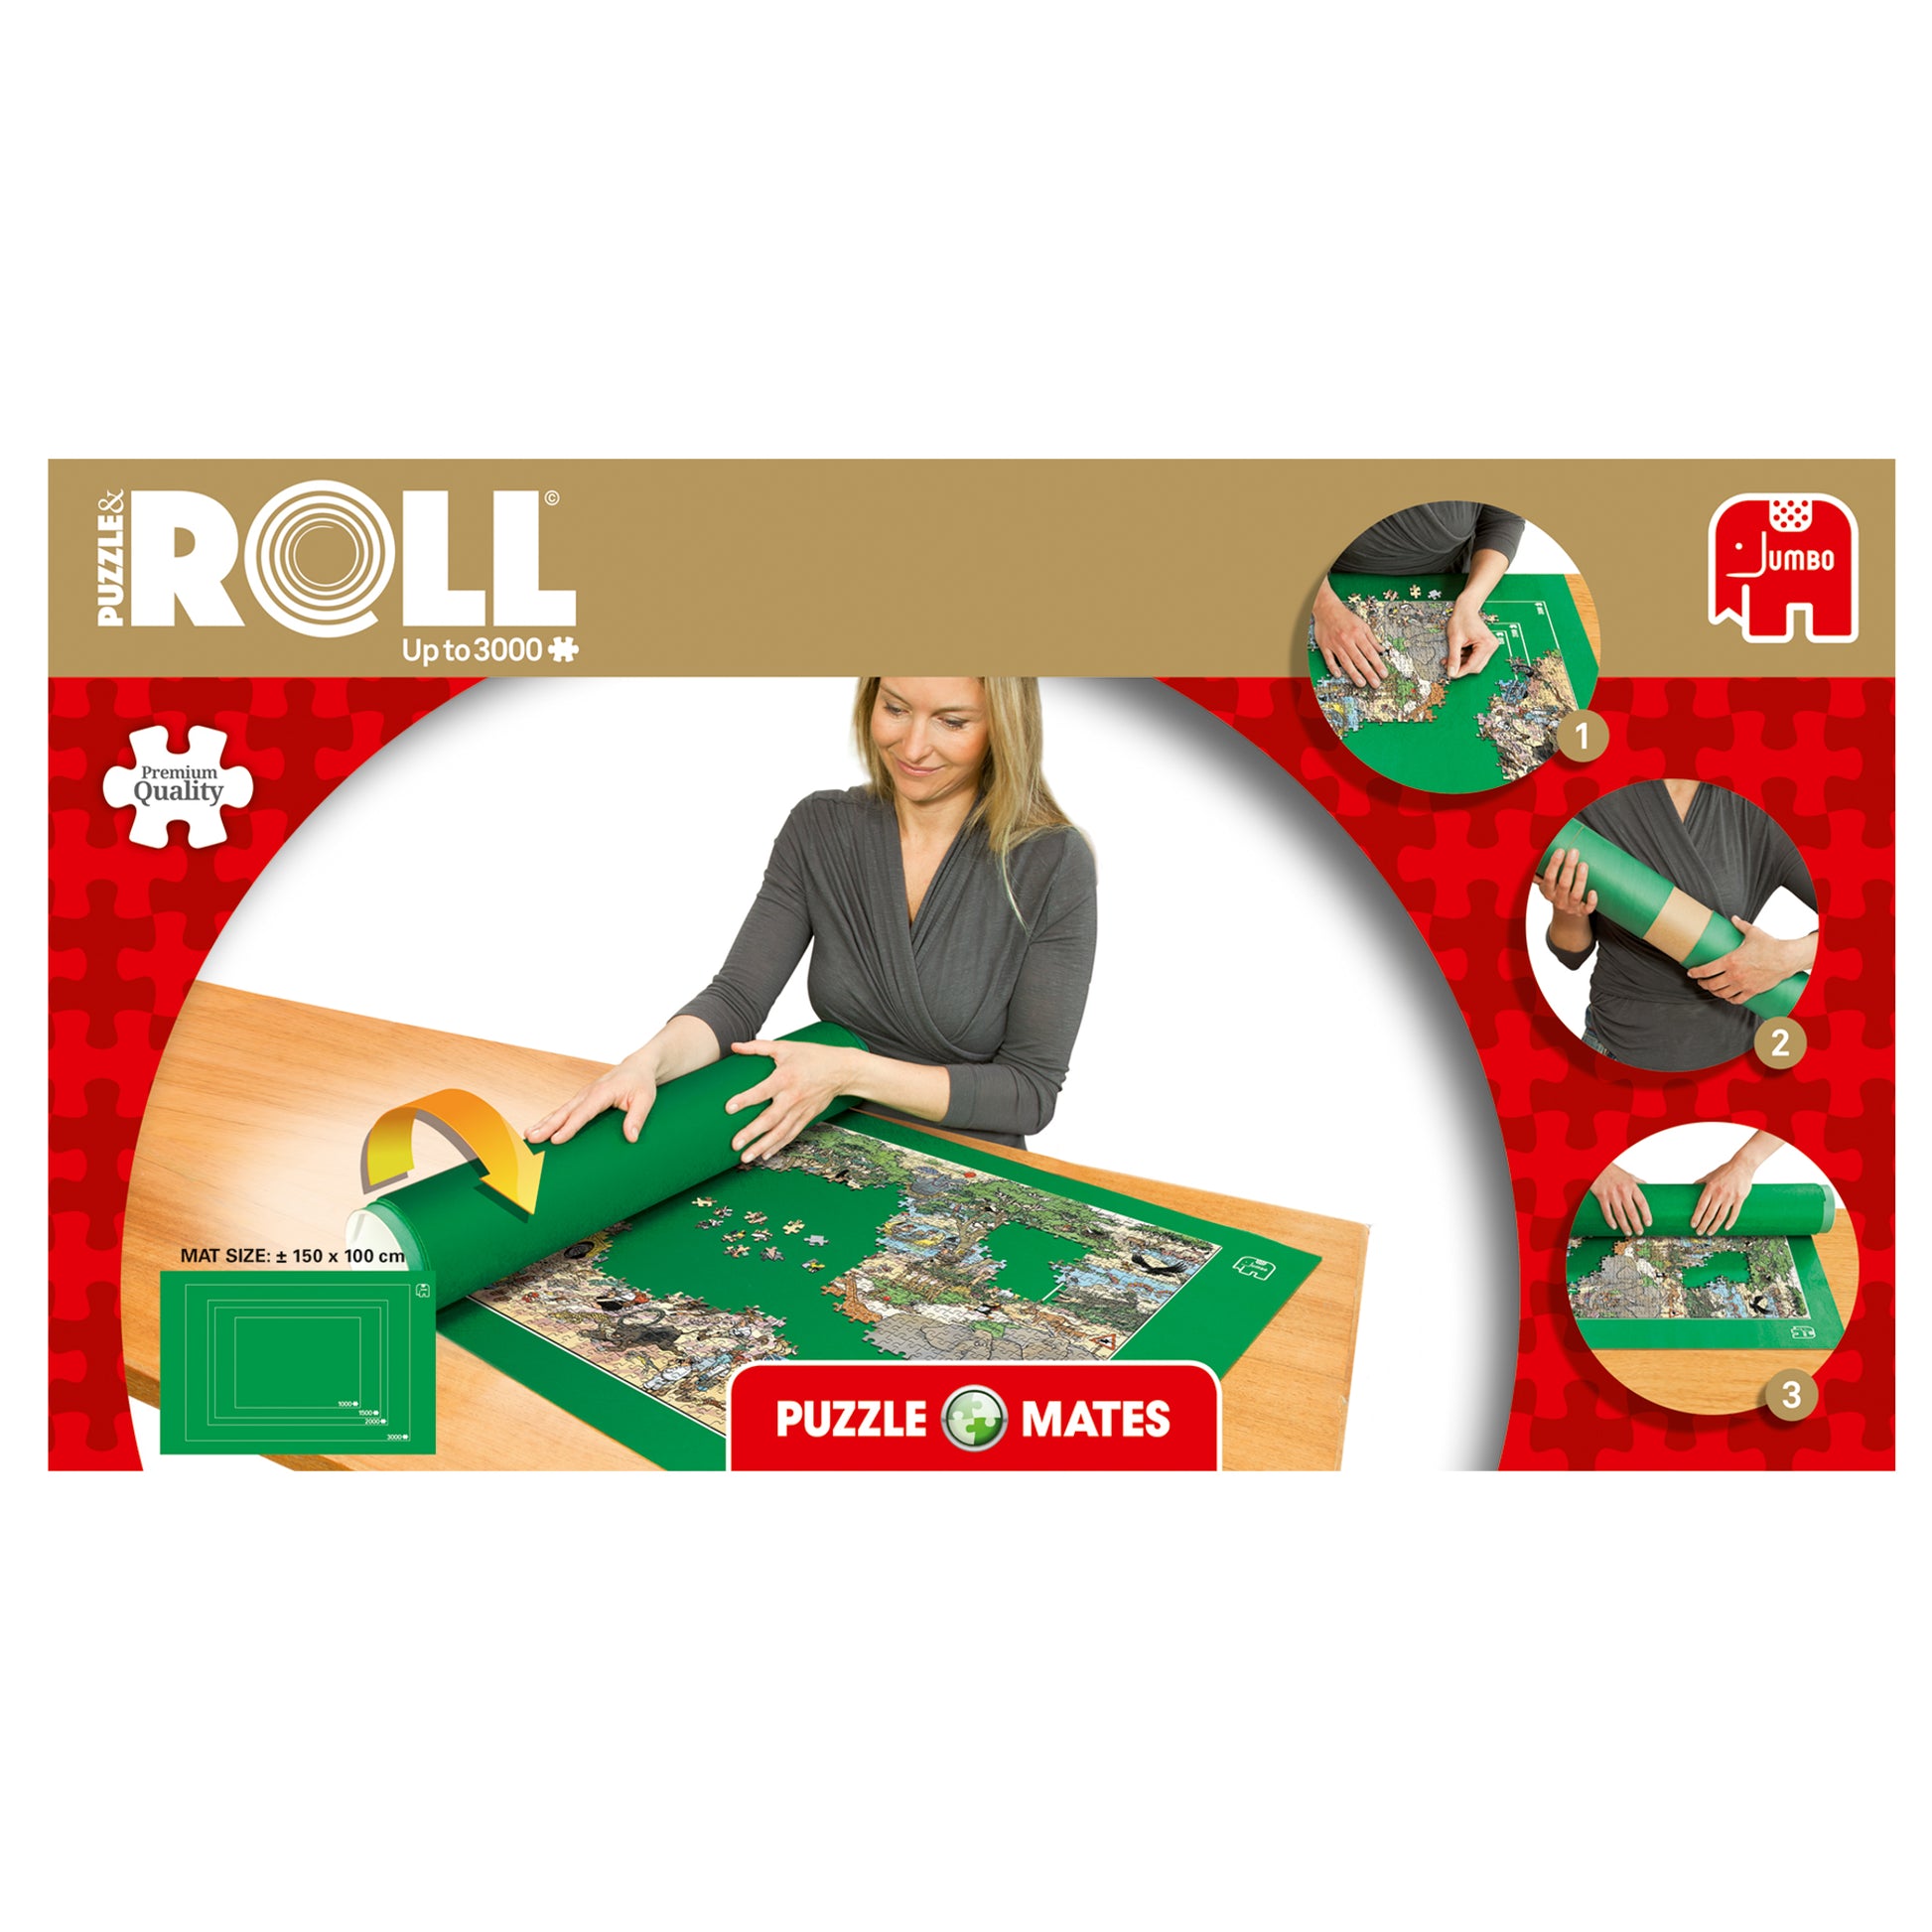 Puzzle Mates - Puzzle & Roll (up to 3000 piece puzzles) - product image - Jumboplay.com